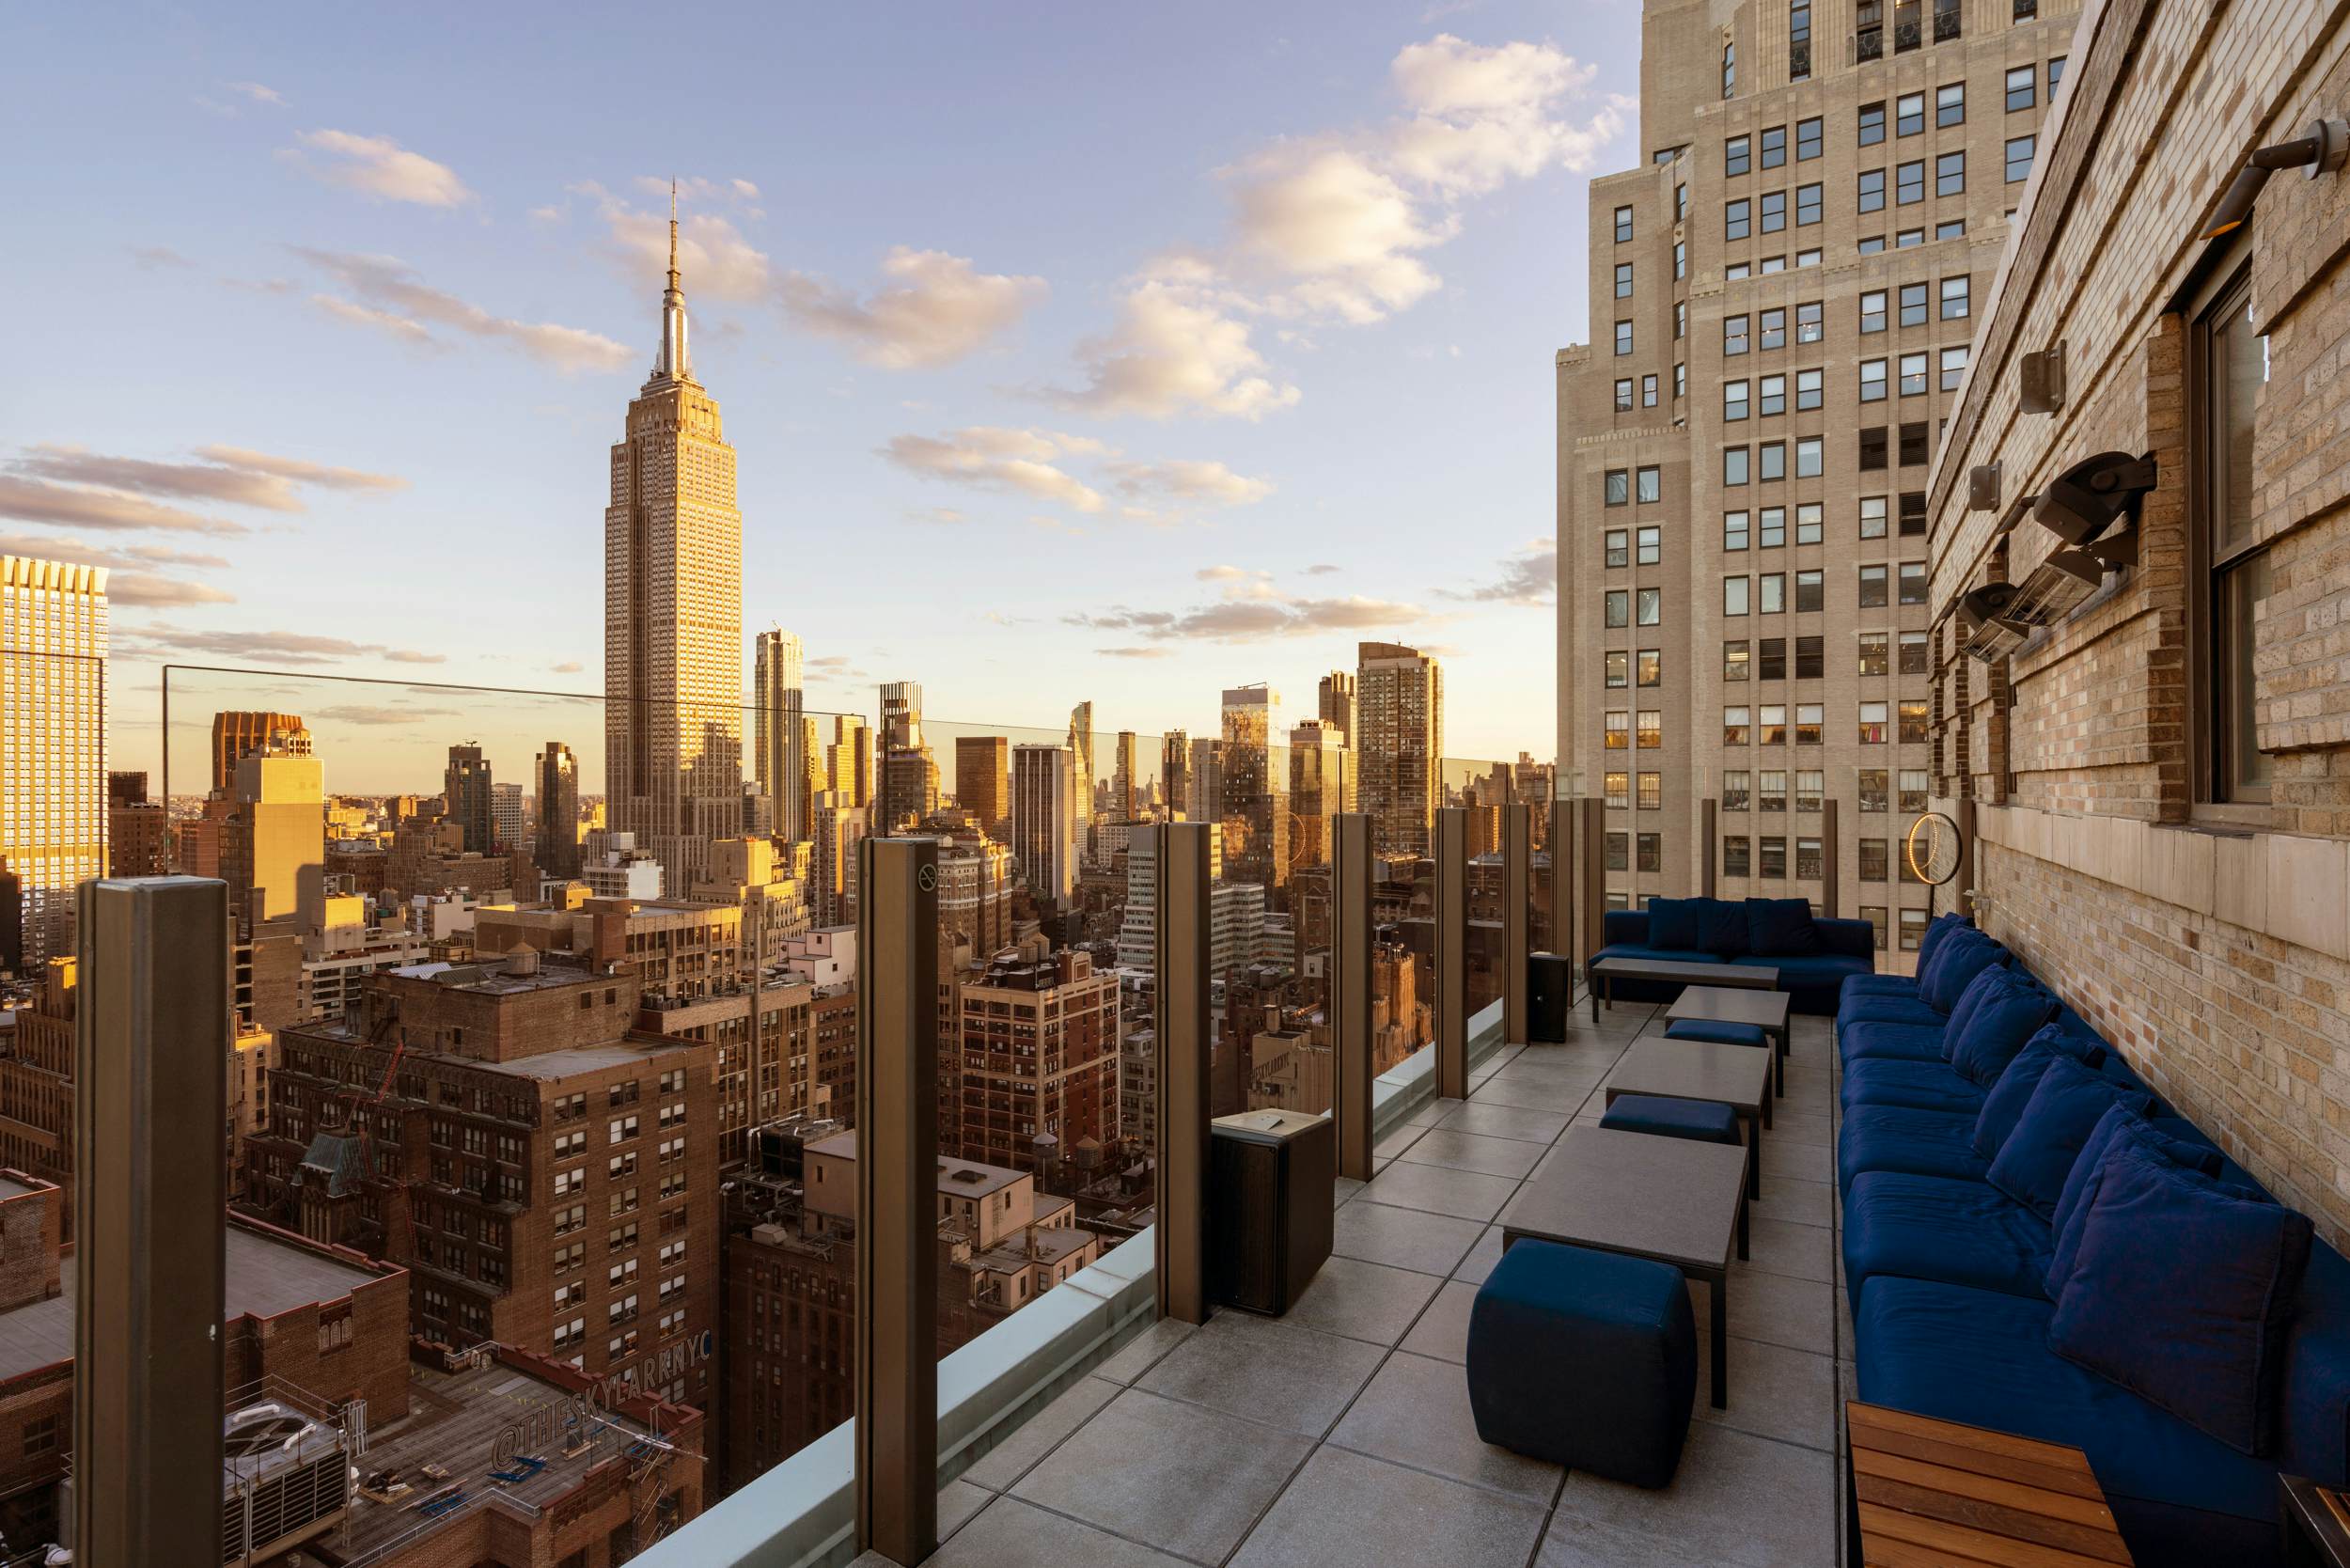 The Best Rooftop Bars In The U S Rooftop Bars Midtown New York Hot Sex Picture